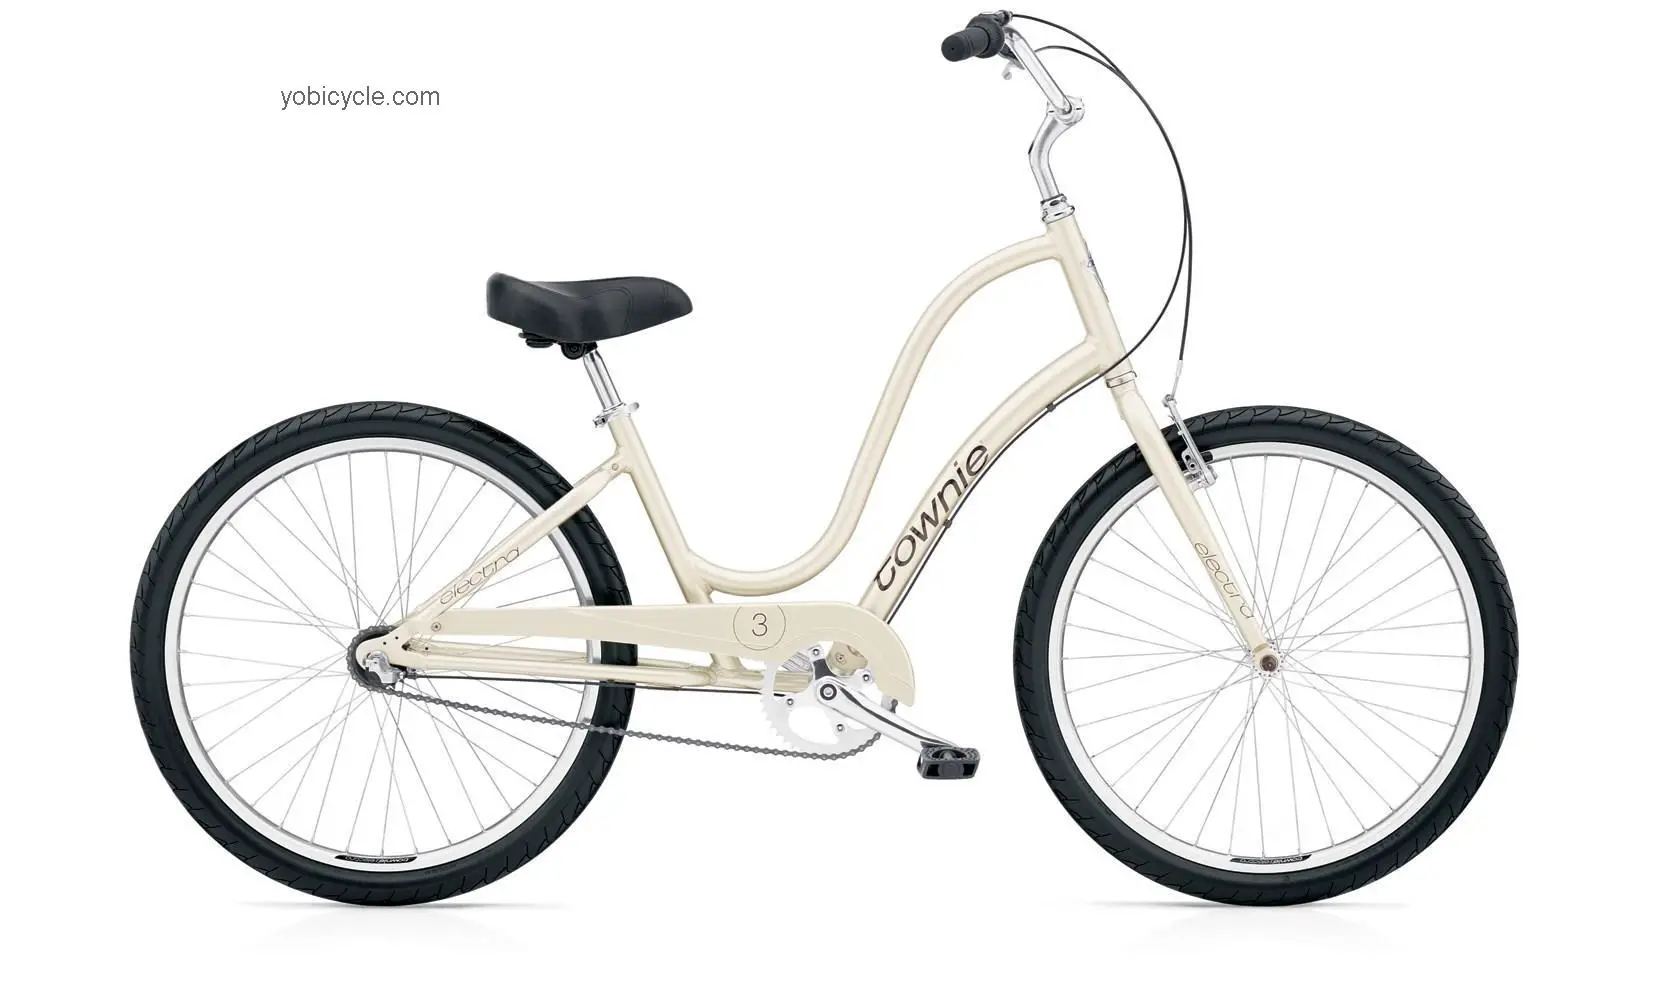 Electra Townie Original 3i Ladies 2011 comparison online with competitors